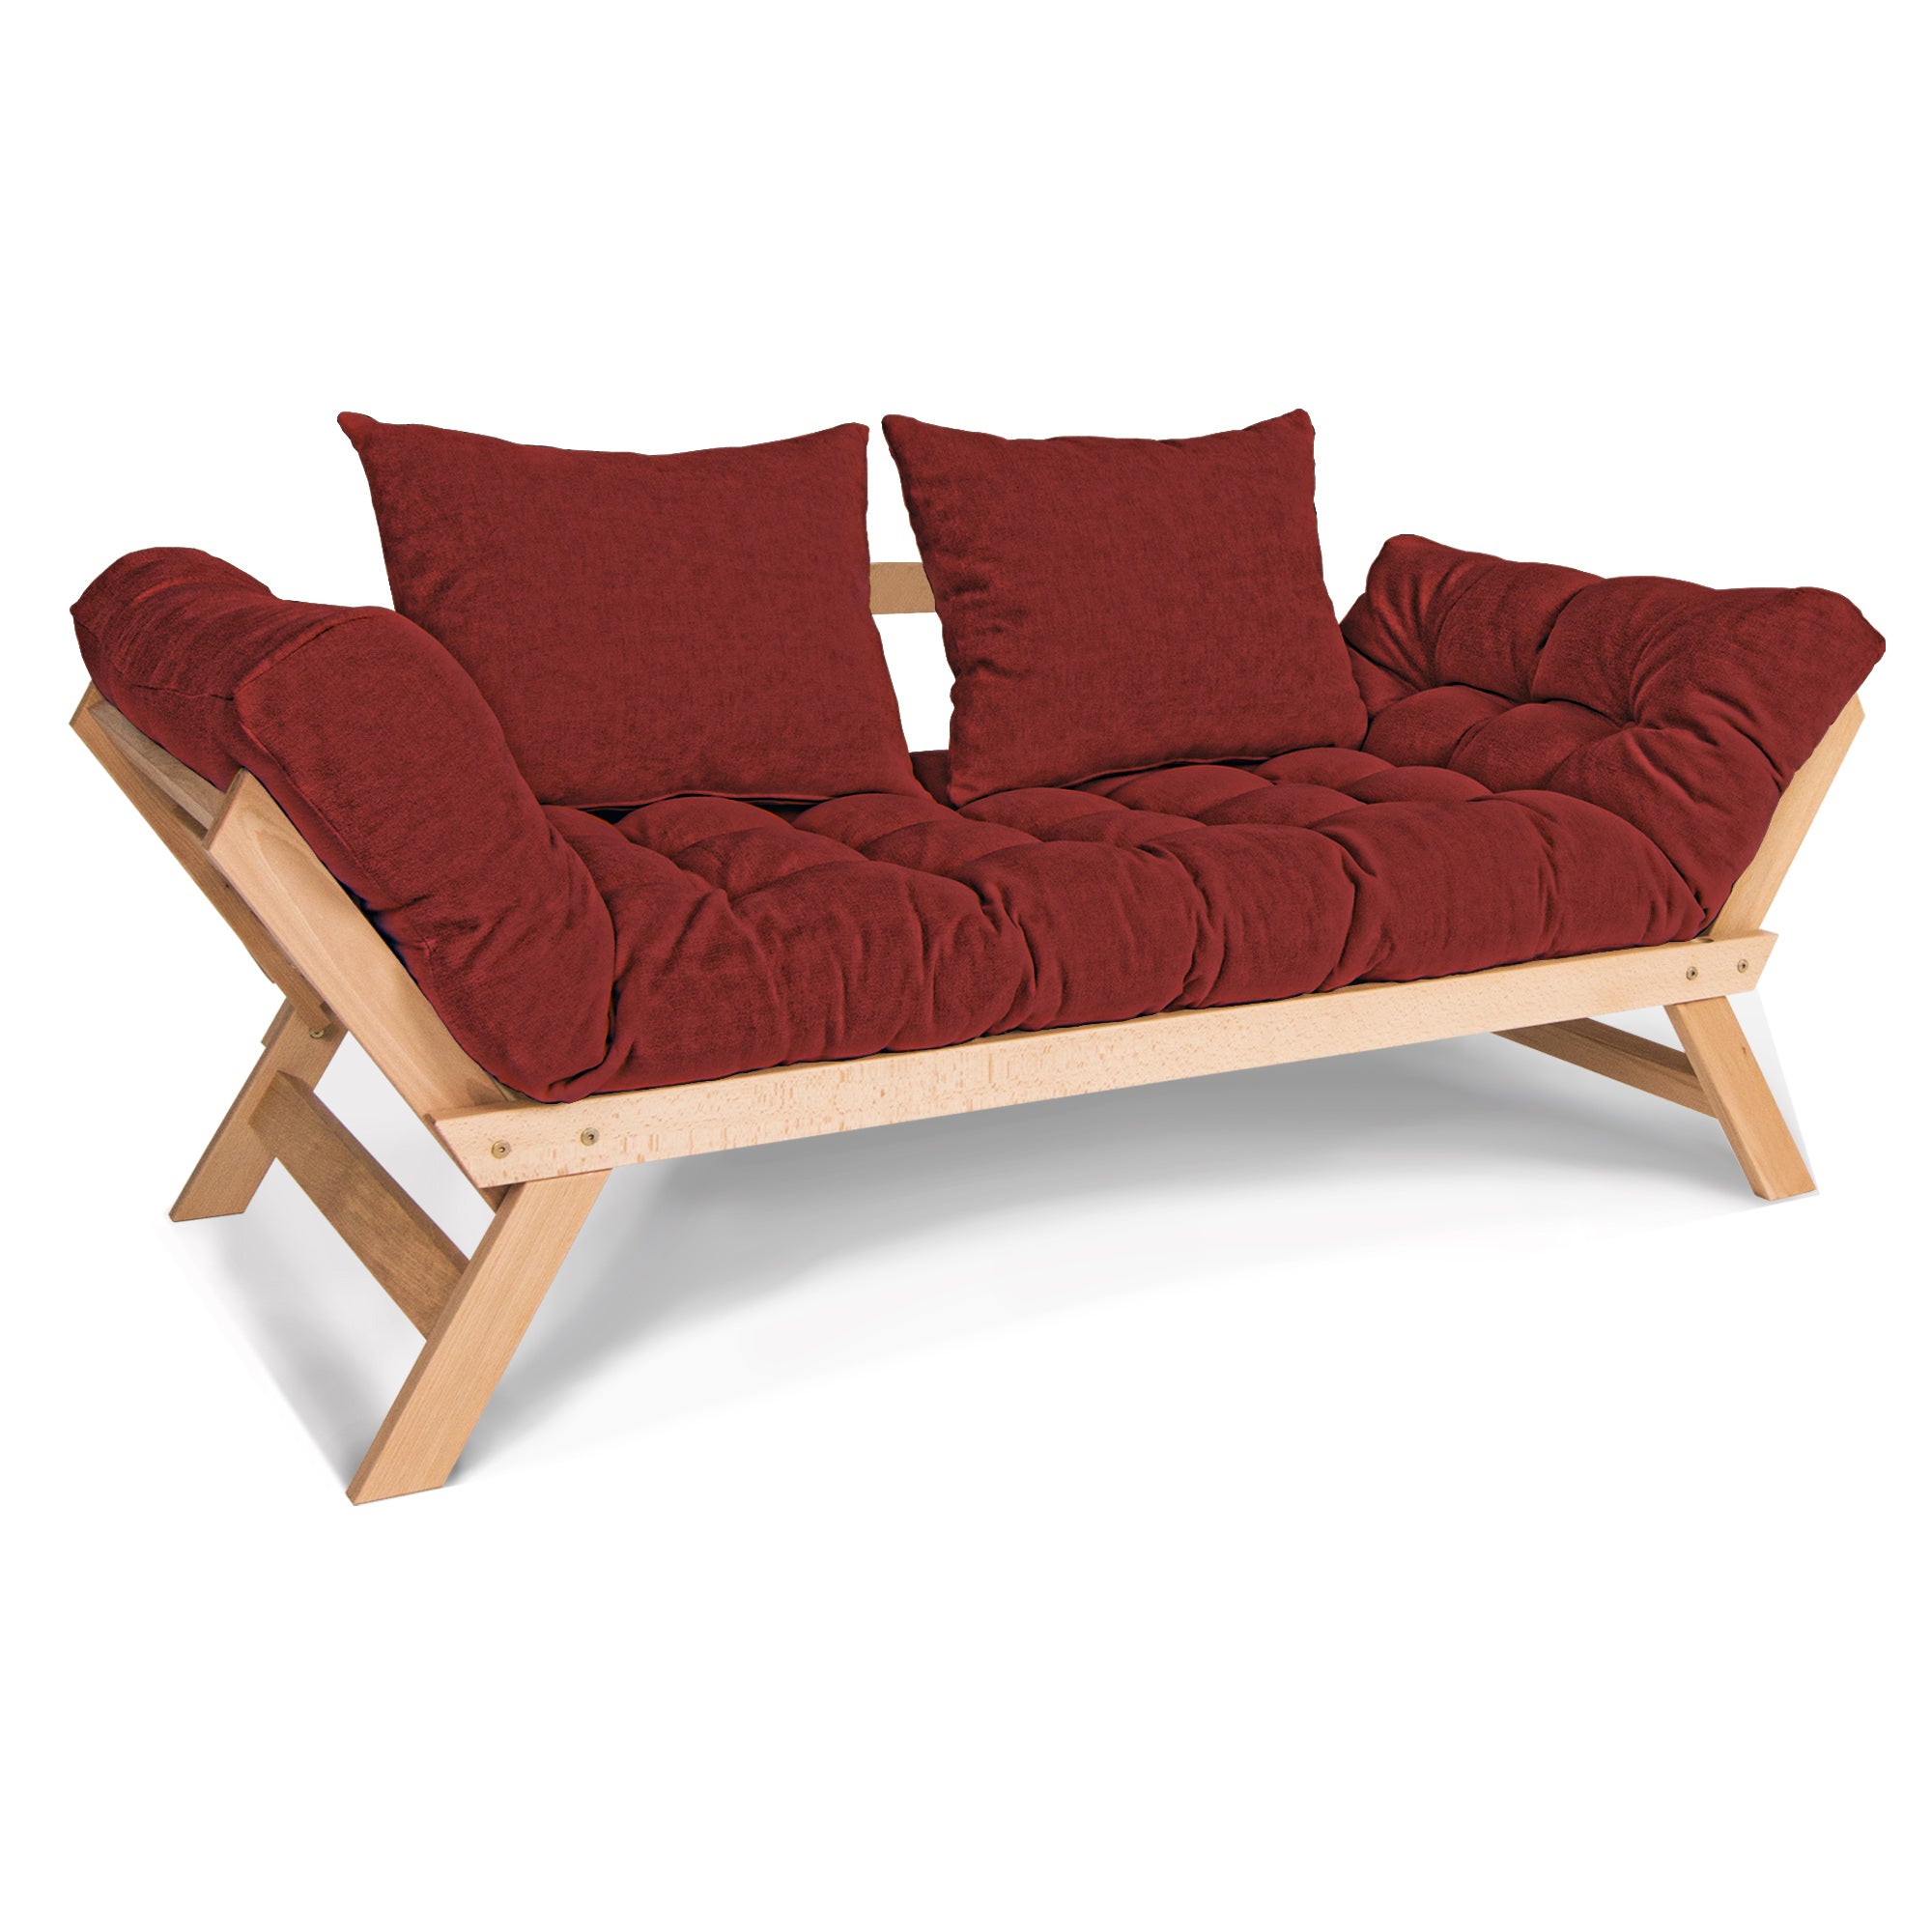 ALLEGRO Folding Sofa Bed, Beech Wood Frame, Natural Colour upholstery colour  red